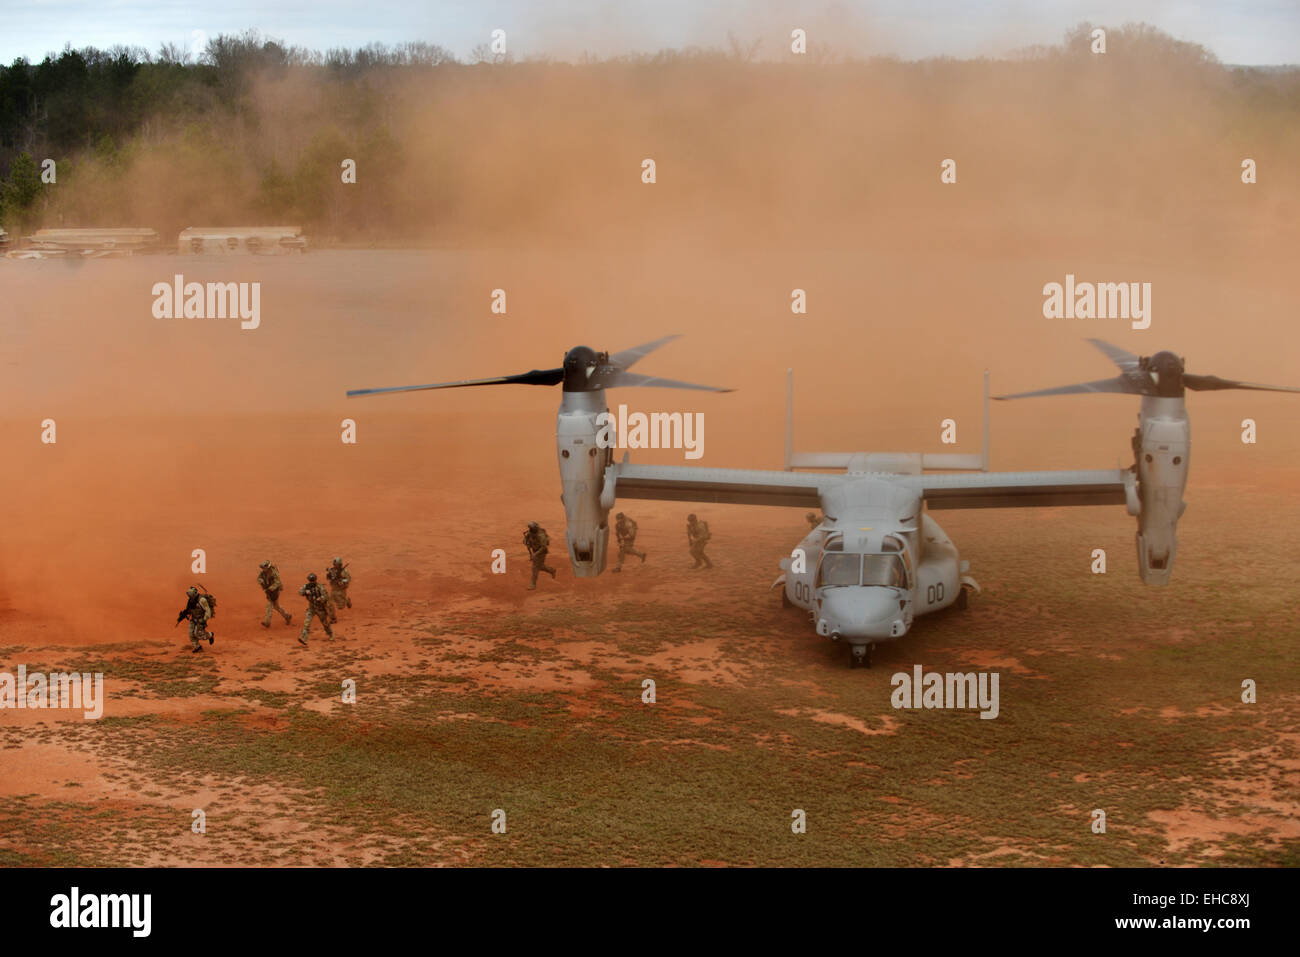 US Air Force Pararescue Jumpers and Combat Rescue Officers from the 920th Rescue Wing conduct joint training with a Marine Osprey tilt-rotor aircraft at the Guardian Center training facility March 11, 2015 in Perry, Georgia. Stock Photo